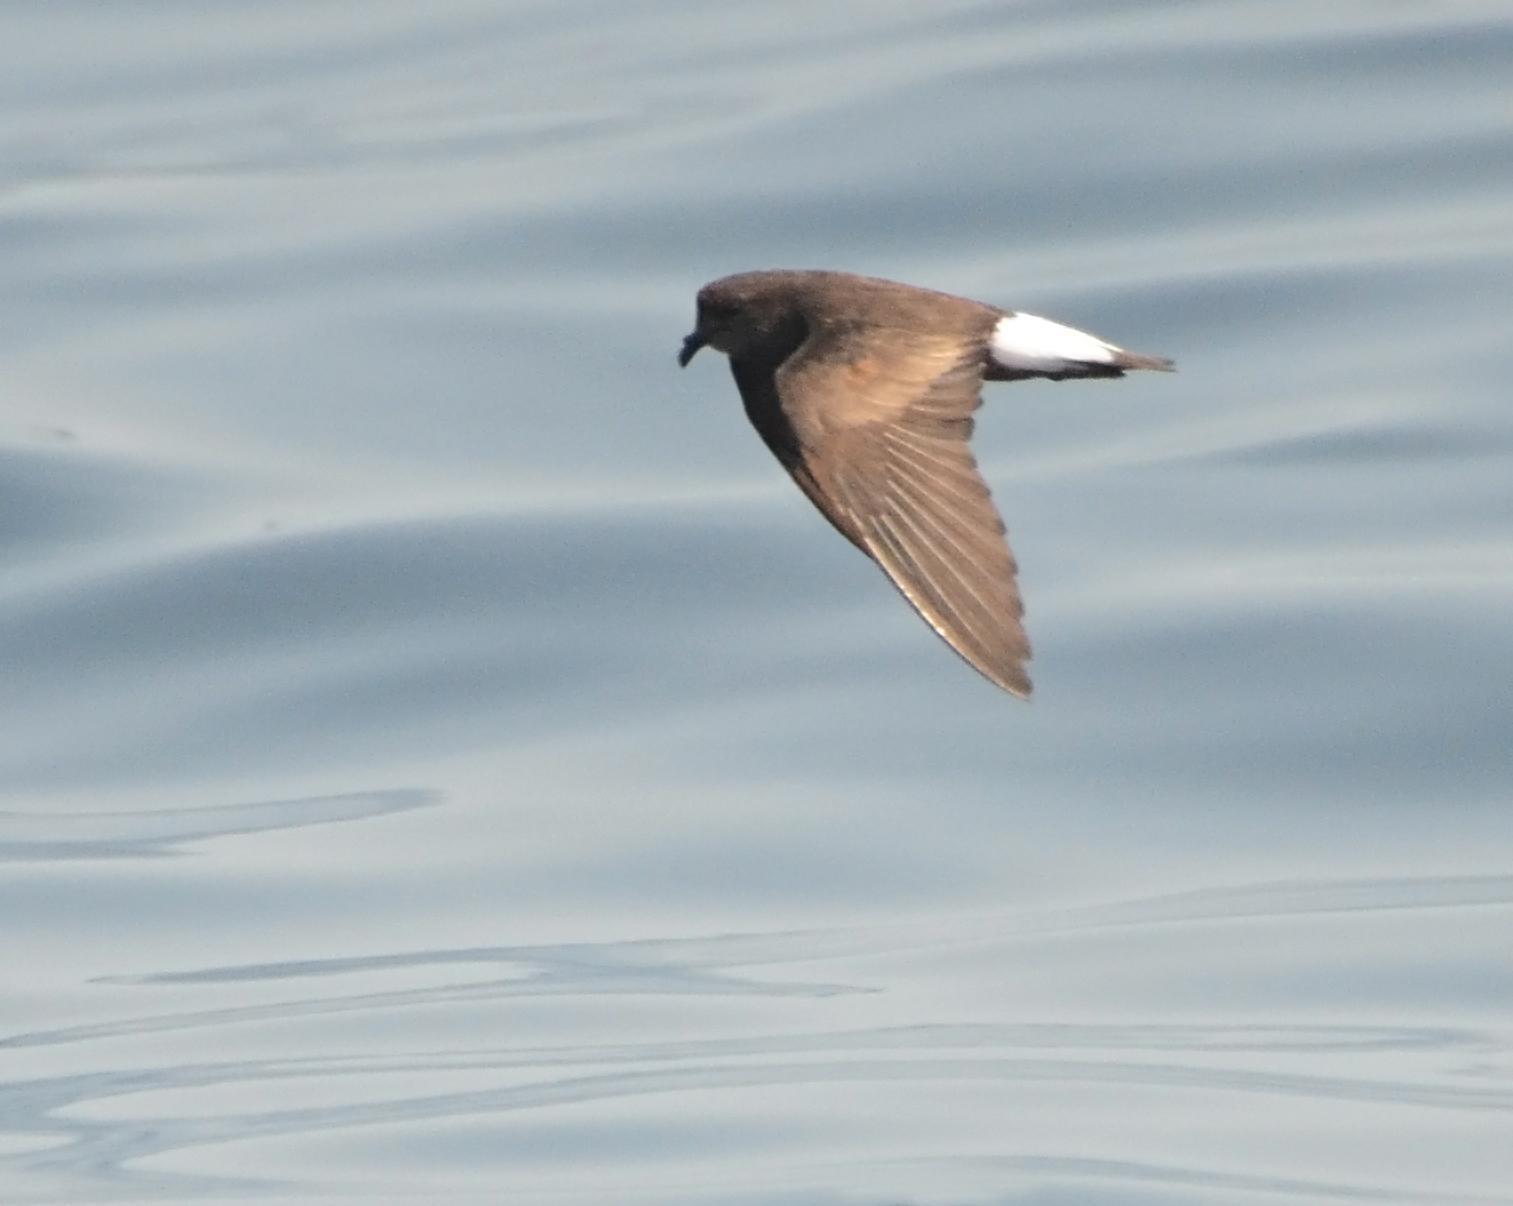 Wedge-rumped Storm-Petrel Photo by Steven Mlodinow